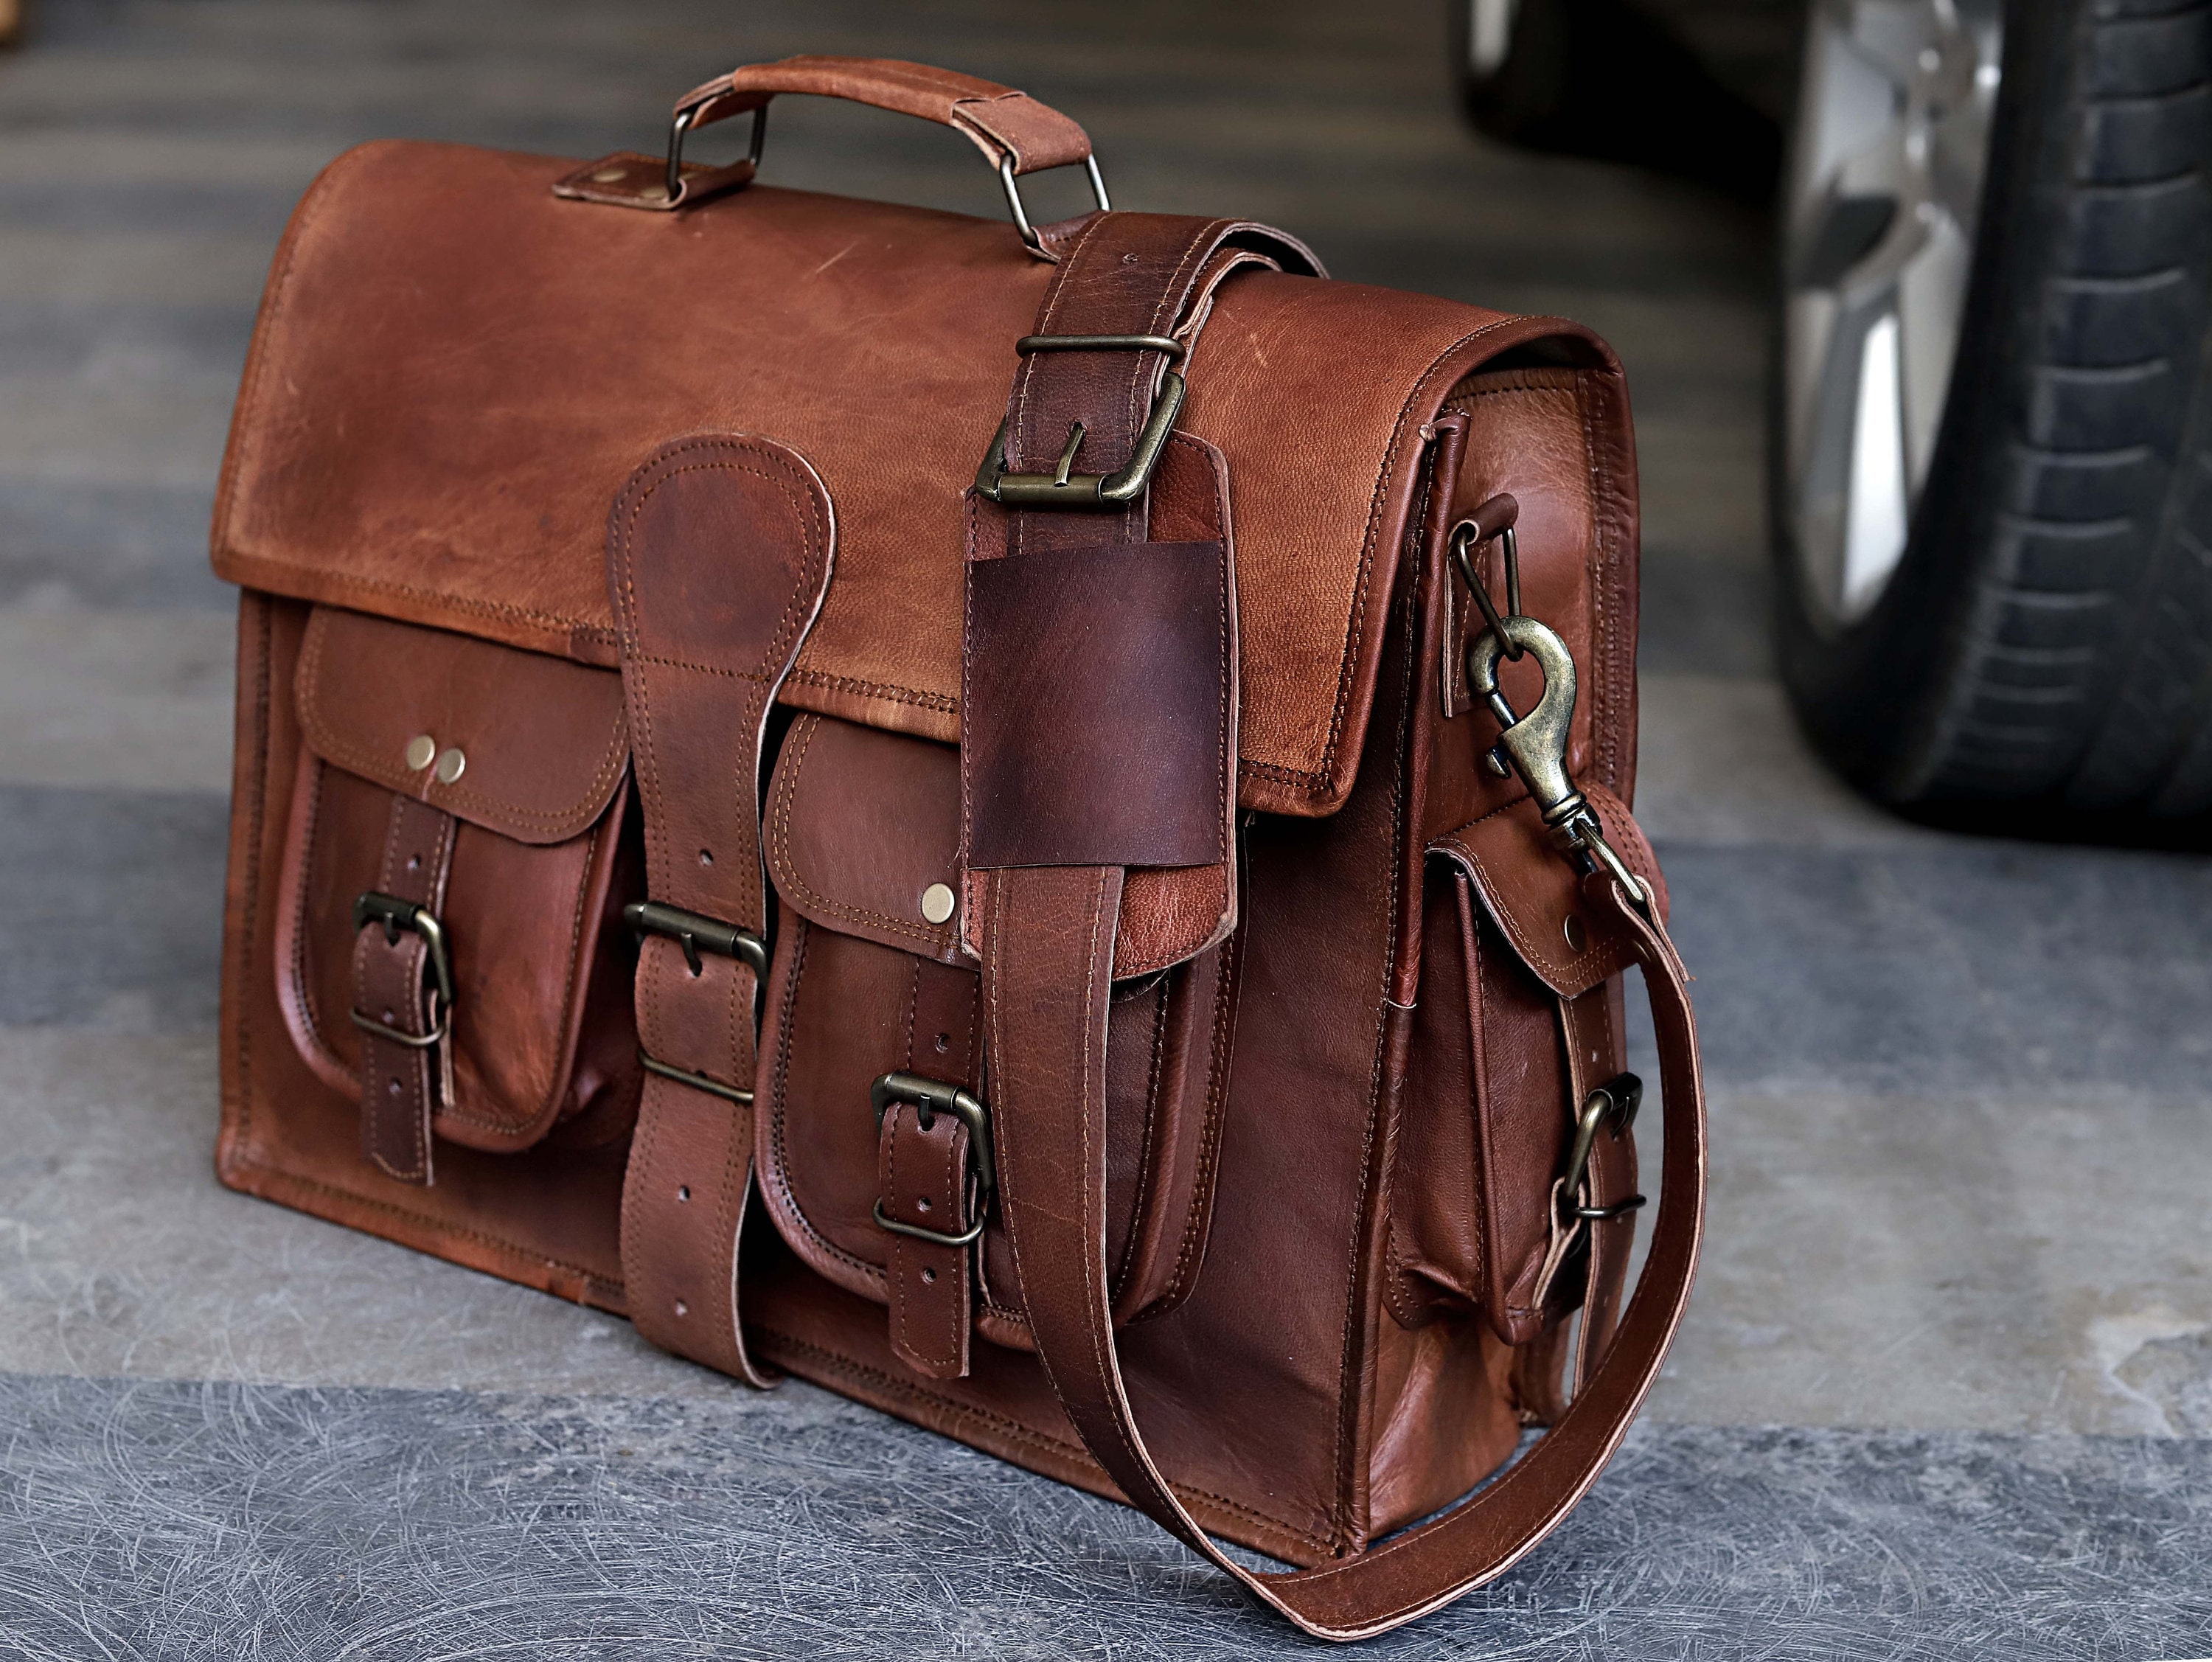 Bag Men's Briefcase/genuine Leather Laptop Bag Leather Office Bags For Men  Briefcase Laptop Business Tote For Document 8920